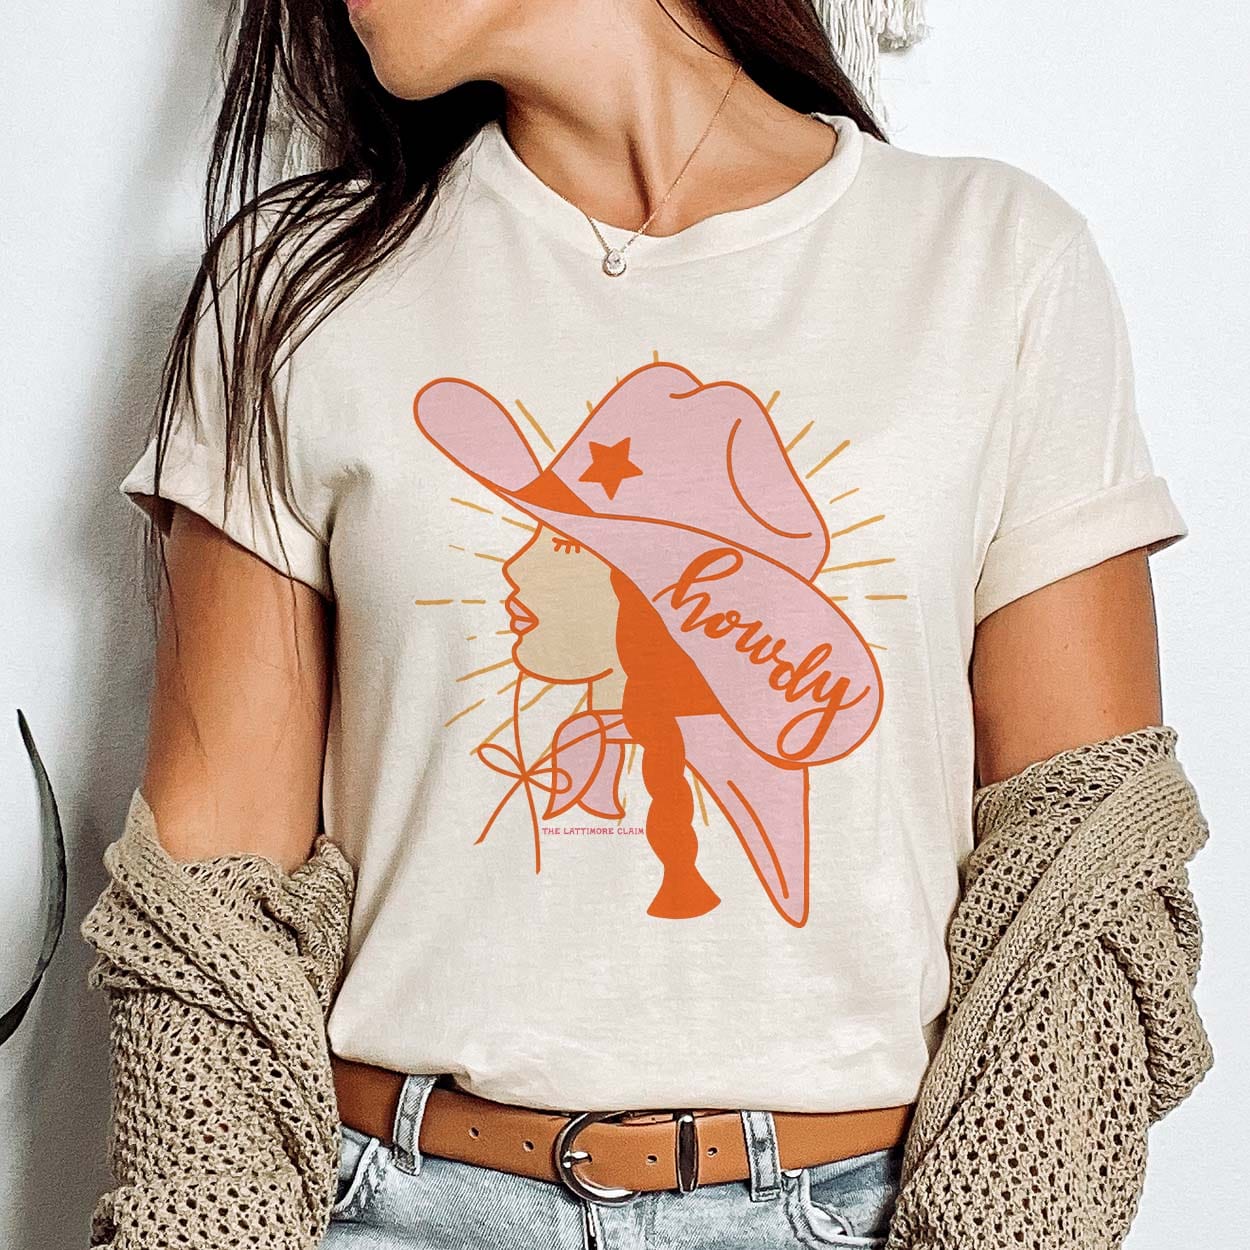 A cream colored short sleeve shirt with folded sleeves featuring a graphic of a cowgirl's side profile with a red braid, pink hat with an orange star and the word "Howdy", a pink bandana, and orange rays coming from the cowgirl. Item is pictured on a plain white background